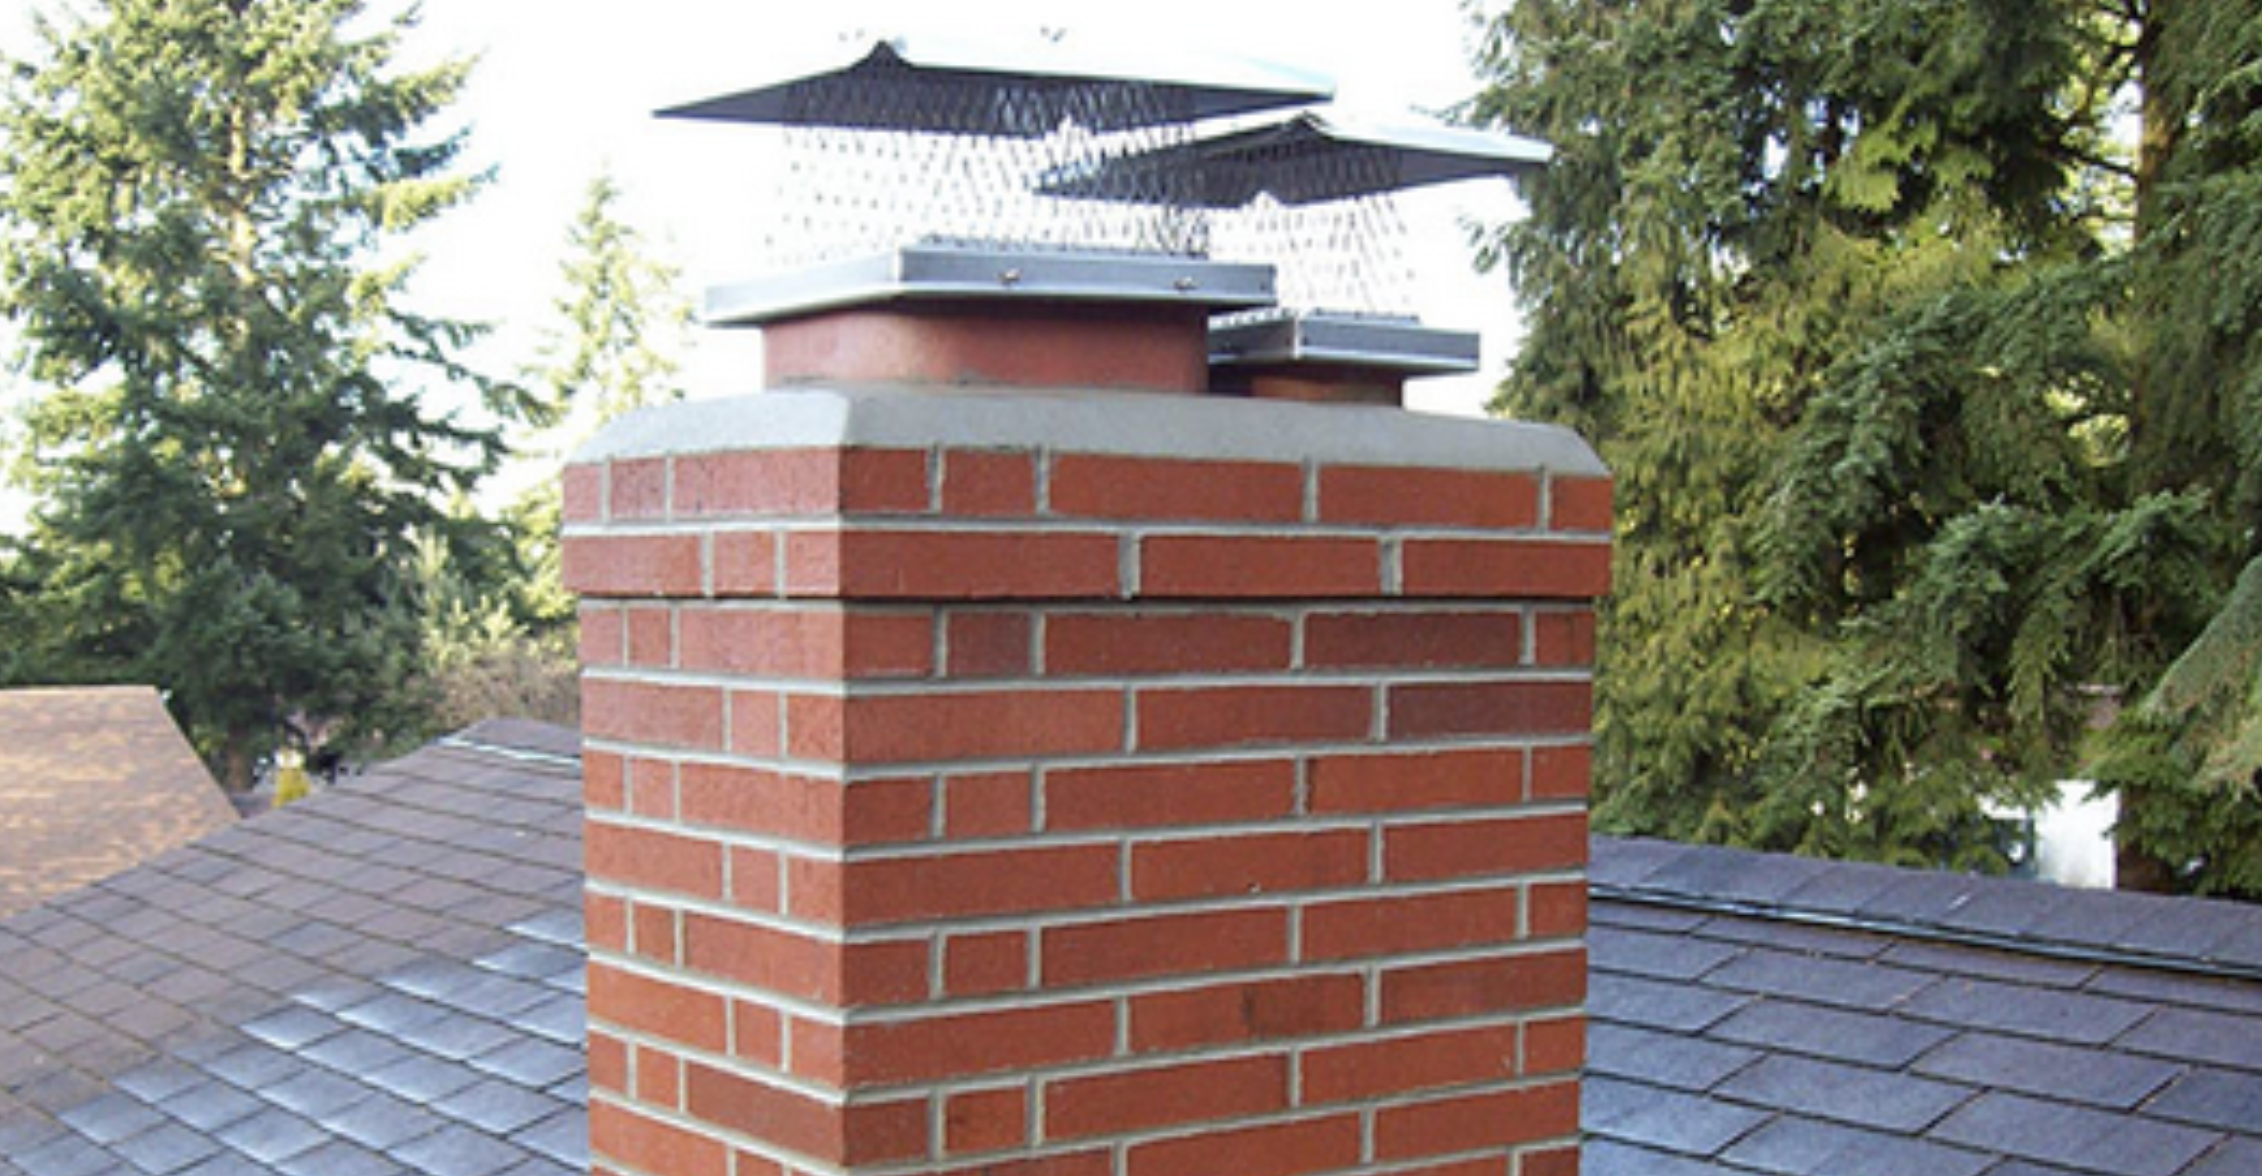 How to prevent chimney fires